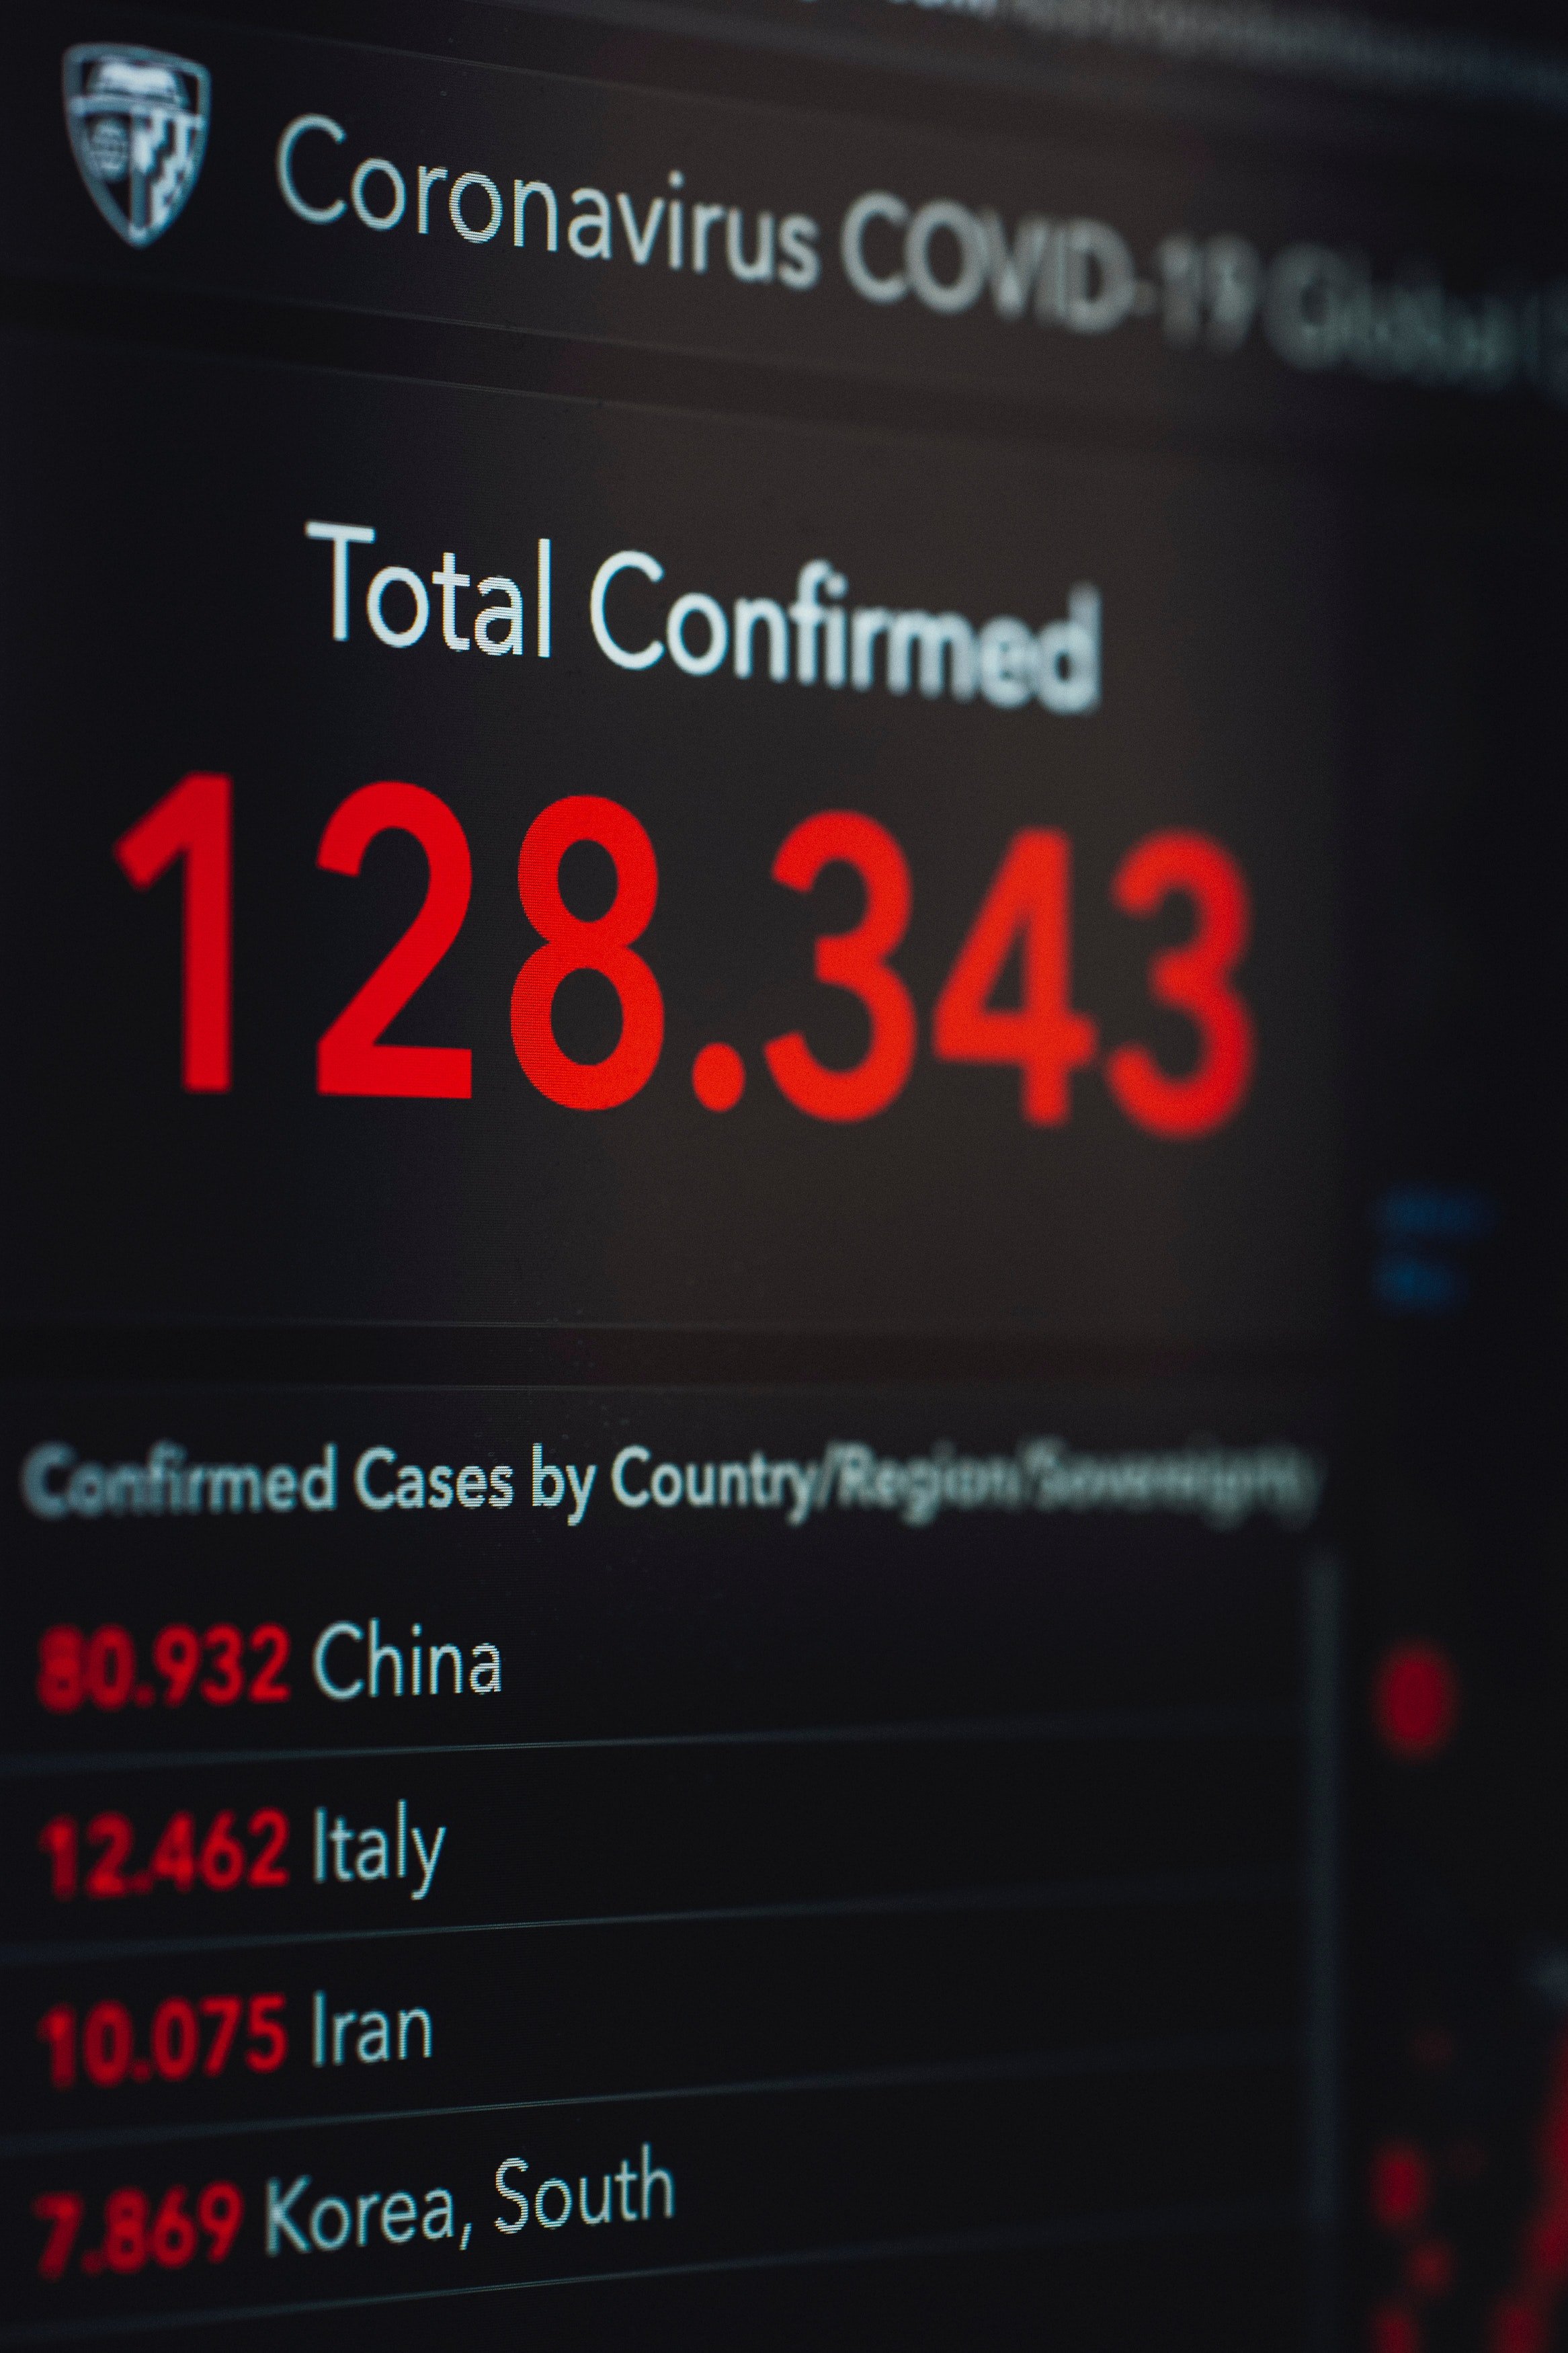 Pictured - Coronavirus statics of different countries on the screen | Source: Pexels 